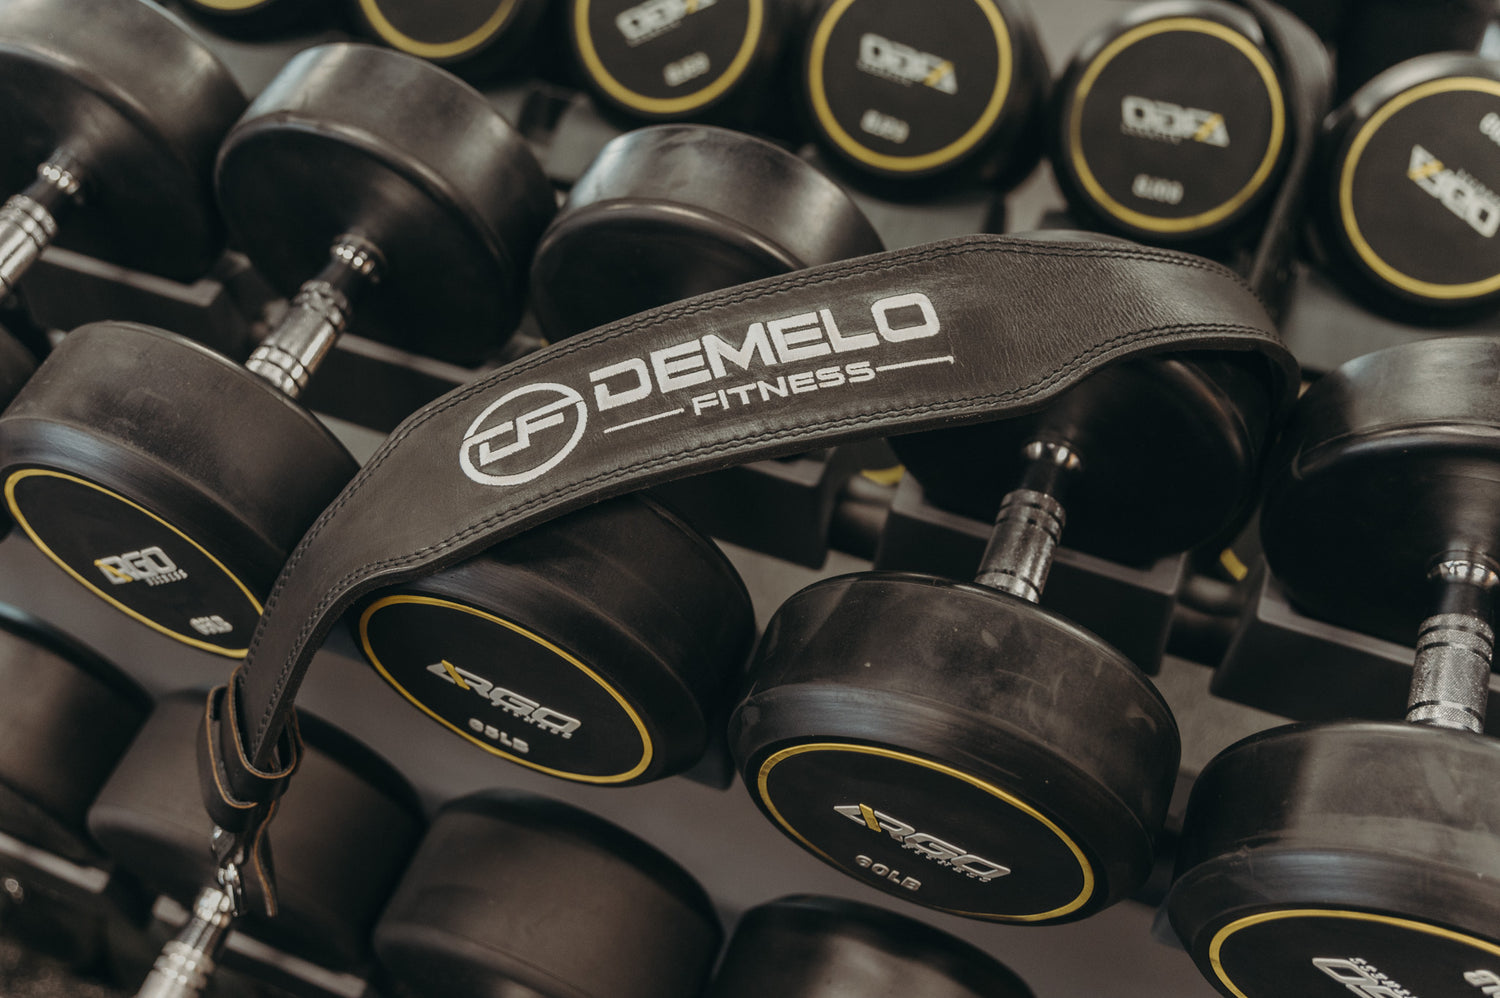 Weights in the DeMelo Fitness gym with a strap overtop branded by DeMelo Fitness